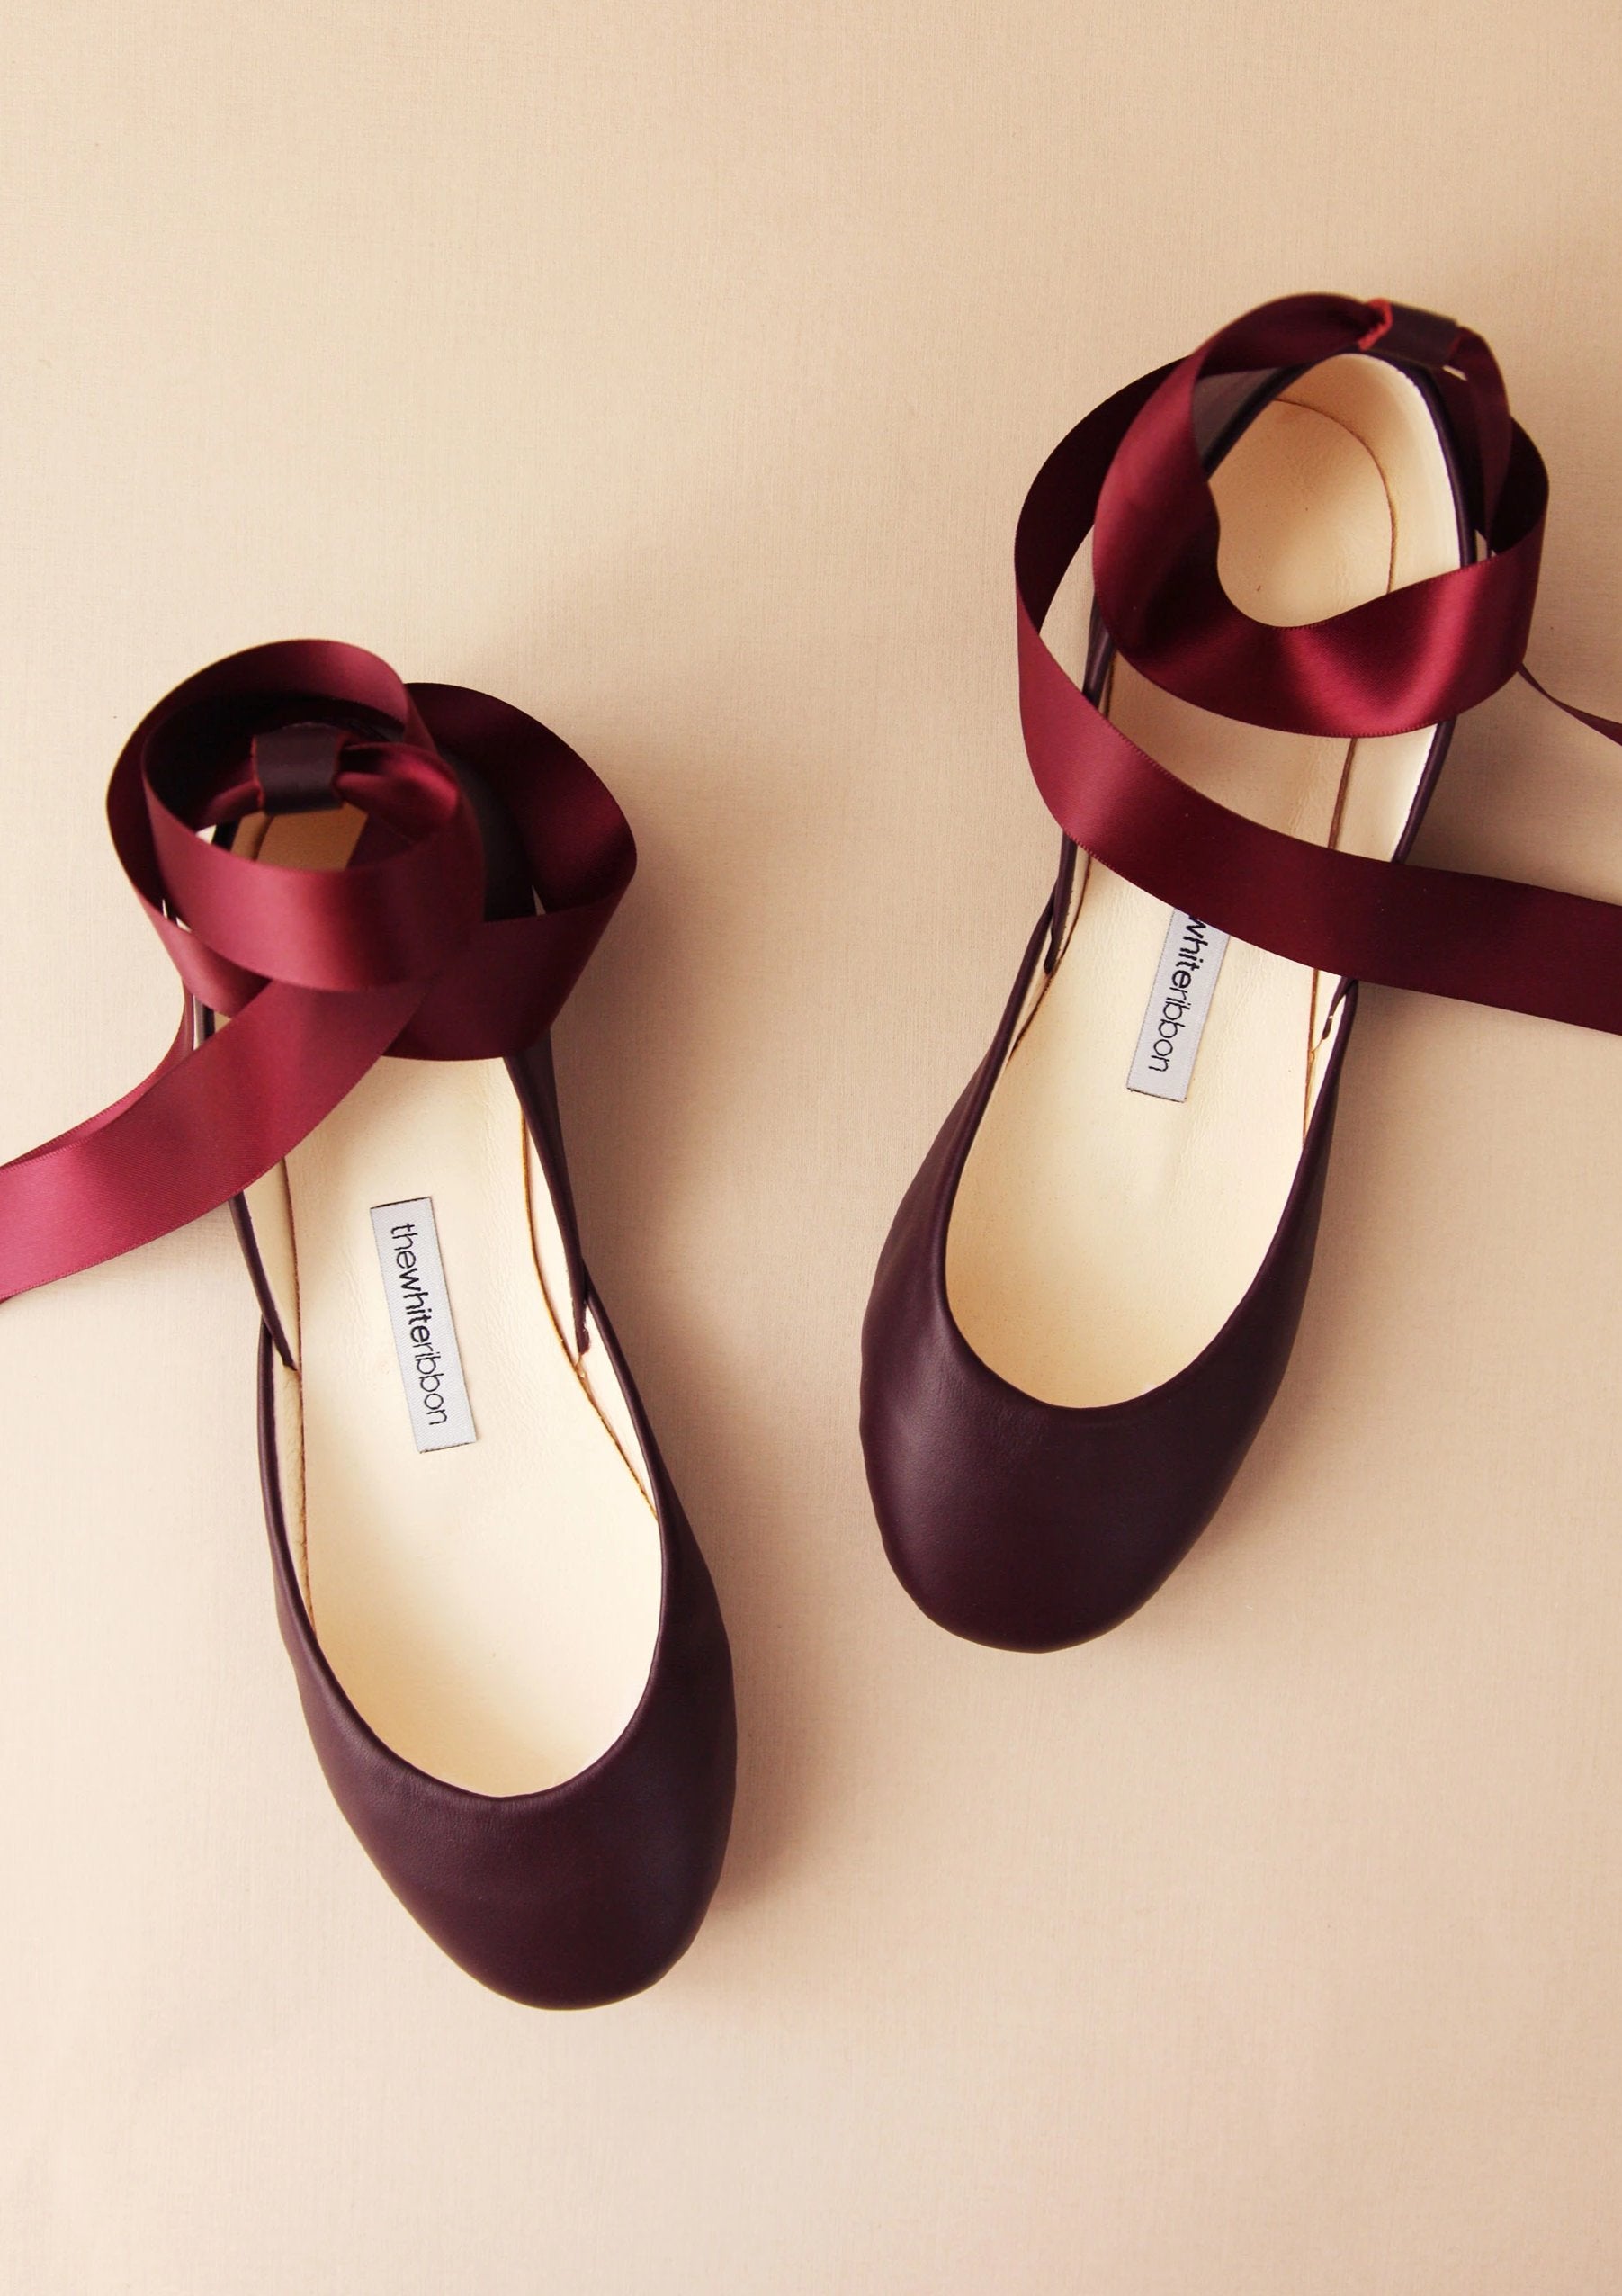 Stylish Ballet Flats with Ribbons